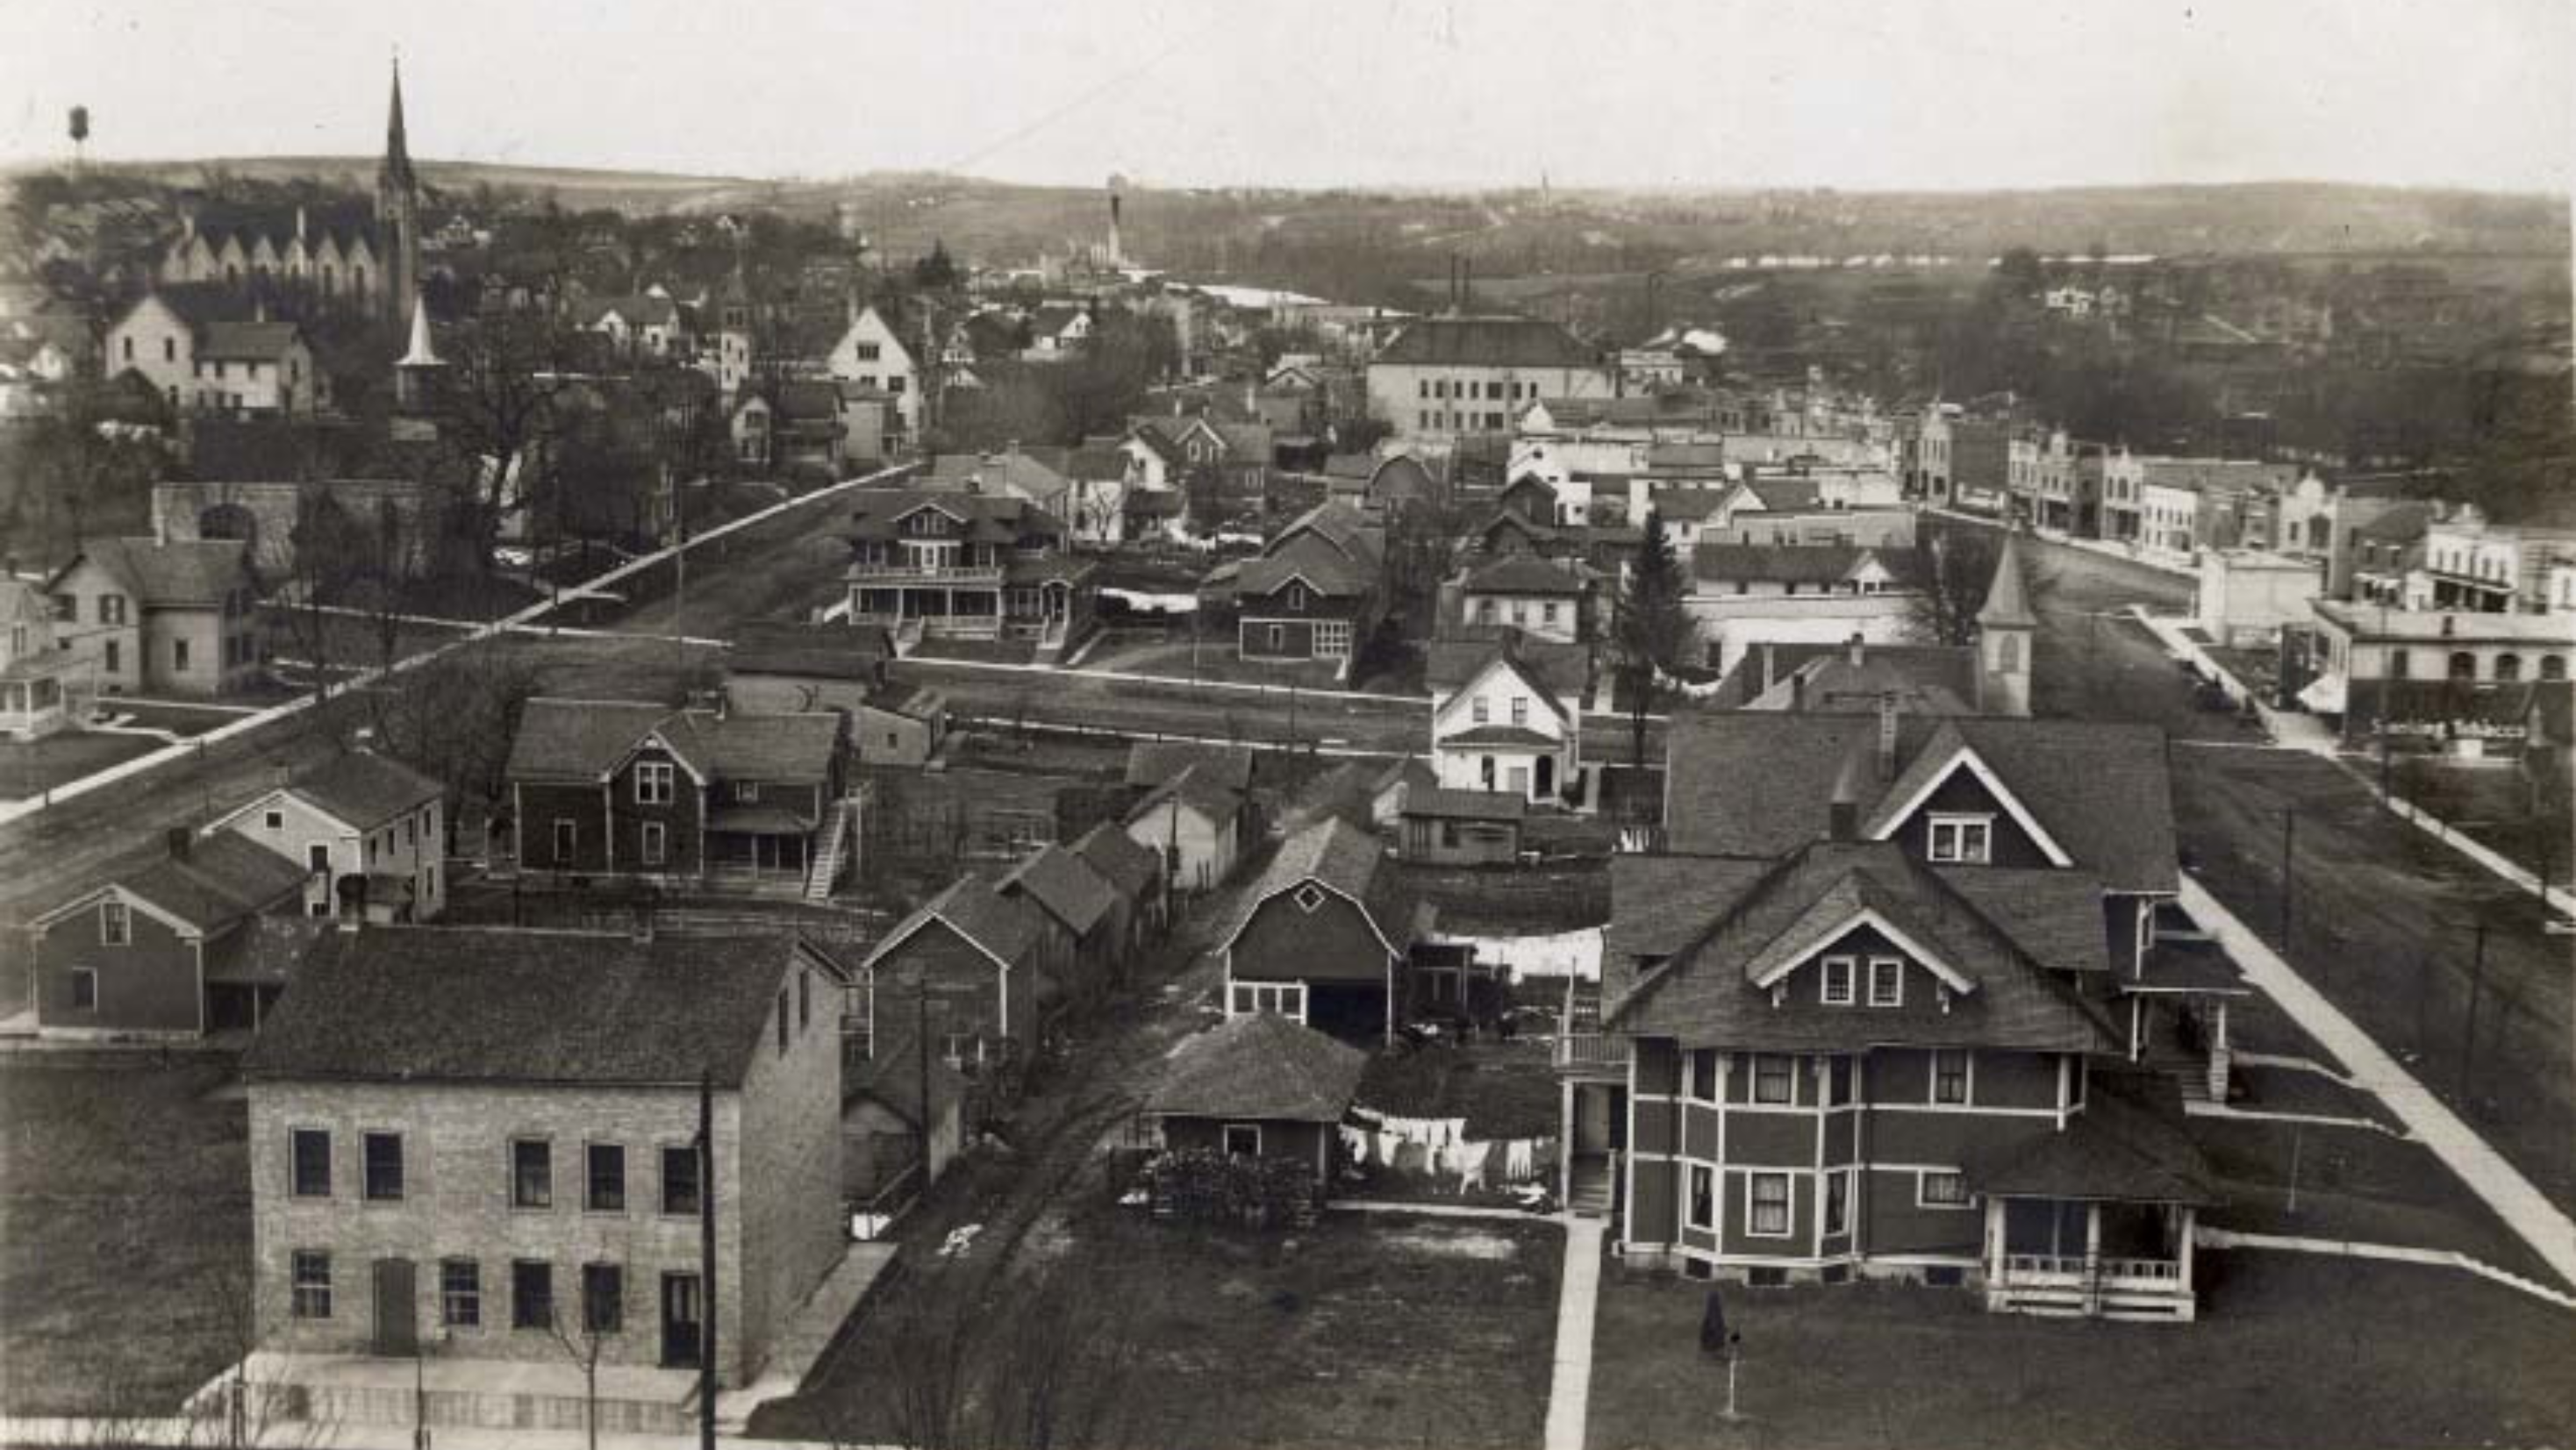 View of the city of West bend from the 1889 Courthouse